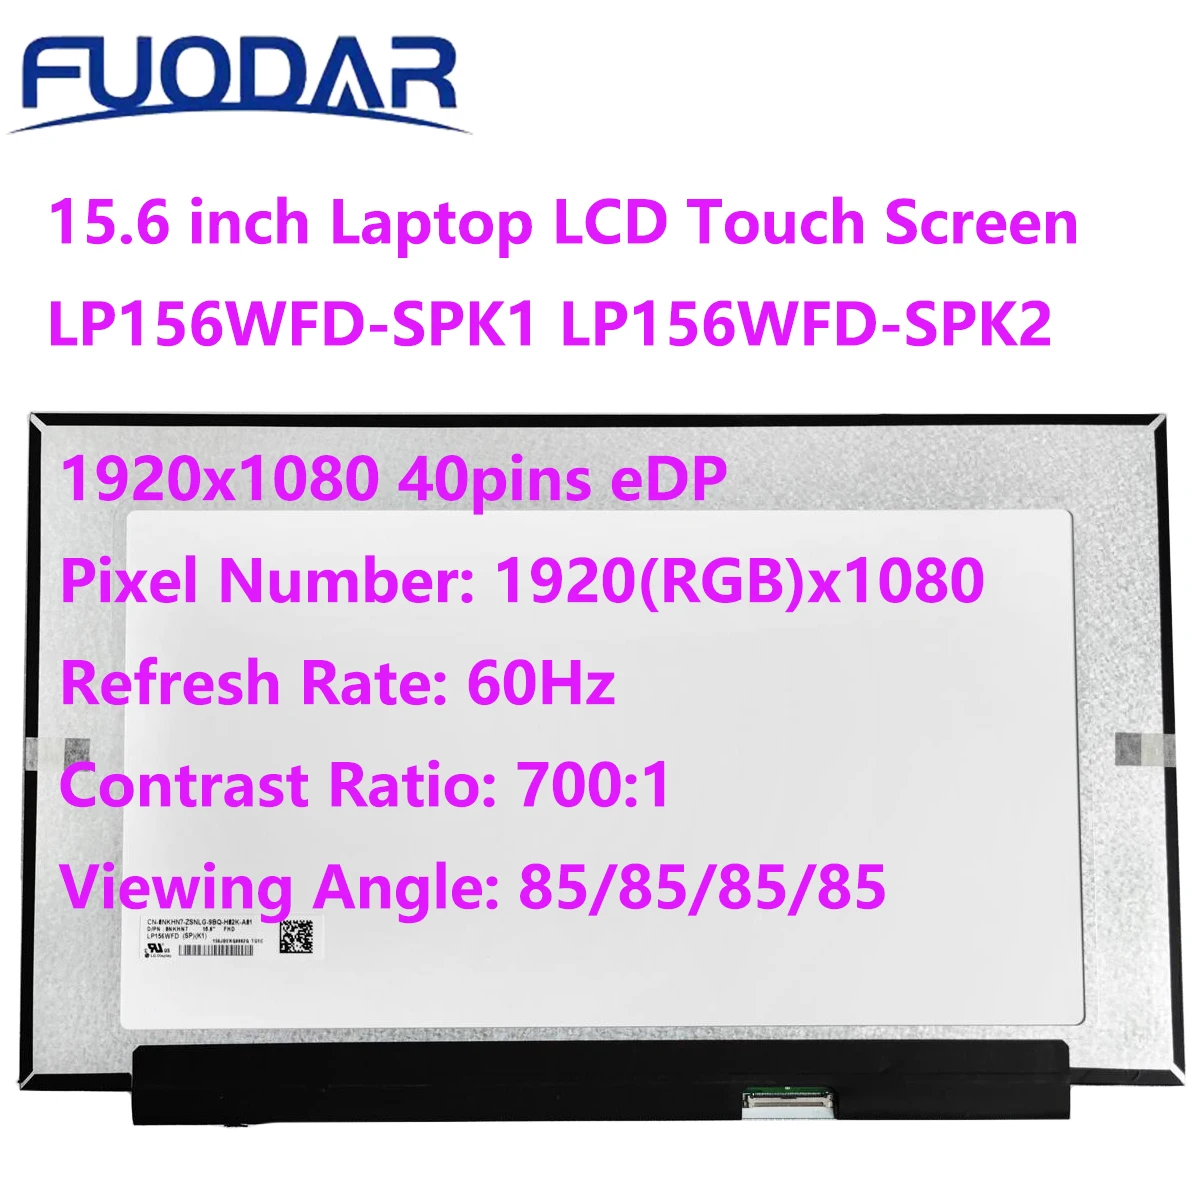 

LP156WFD-SPK1 LP156WFD-SPK2 LED Matrix Display Panel Replacement FHD 1920x1080 40pins eDP For 15.6 inch Laptop LCD Touch Screen